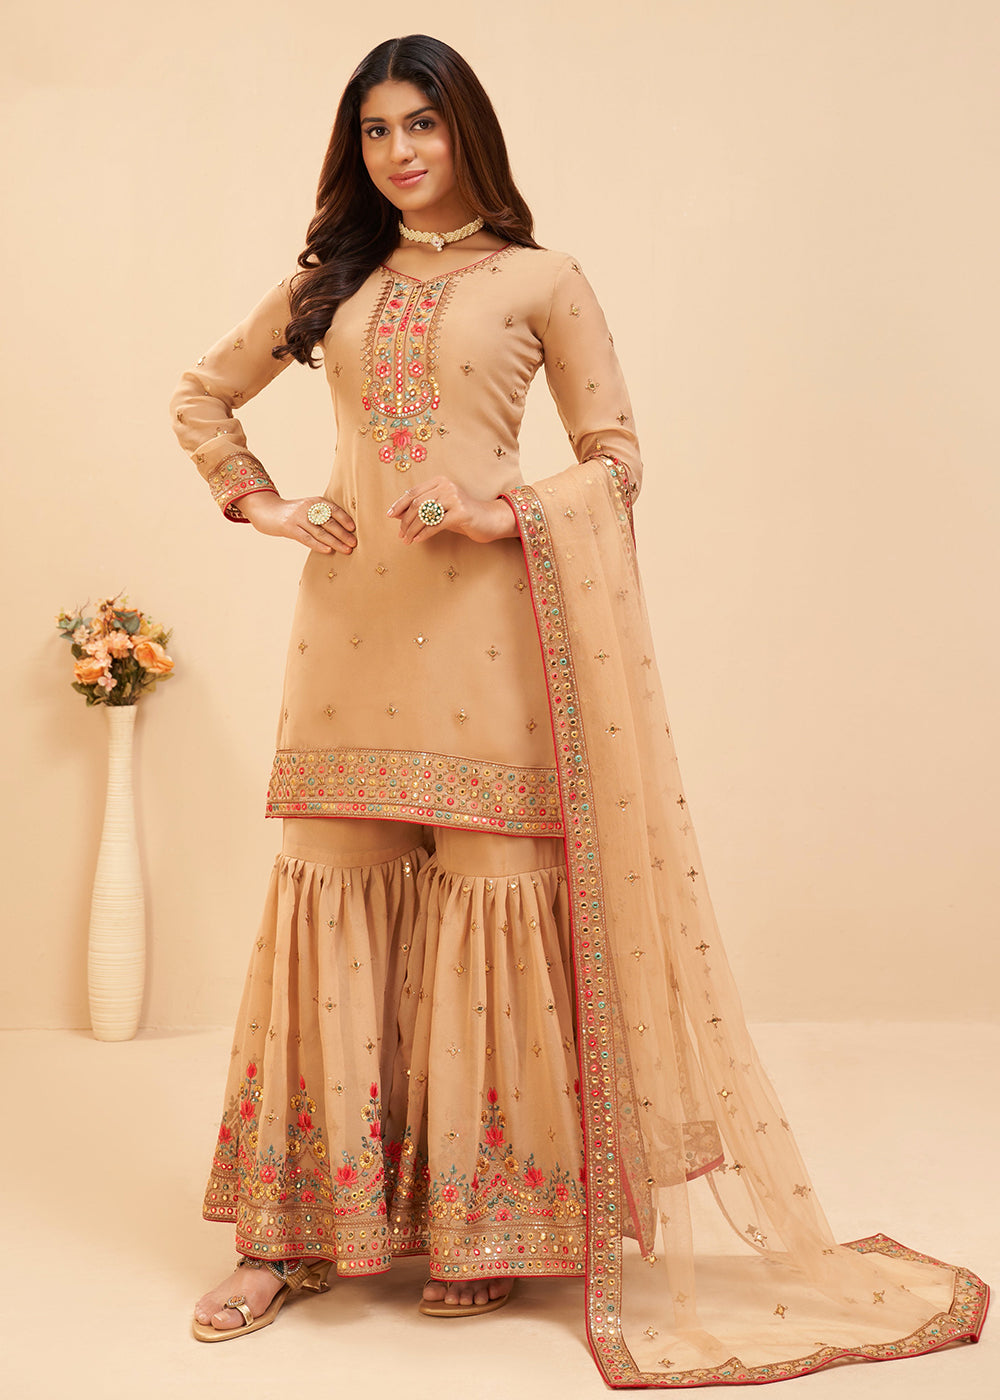 Shop Now Pretty Chikoo Beige Wedding Embroidered Sharara Suit Online at Empress Clothing in USA, UK, Canada, Germany & Worldwide.